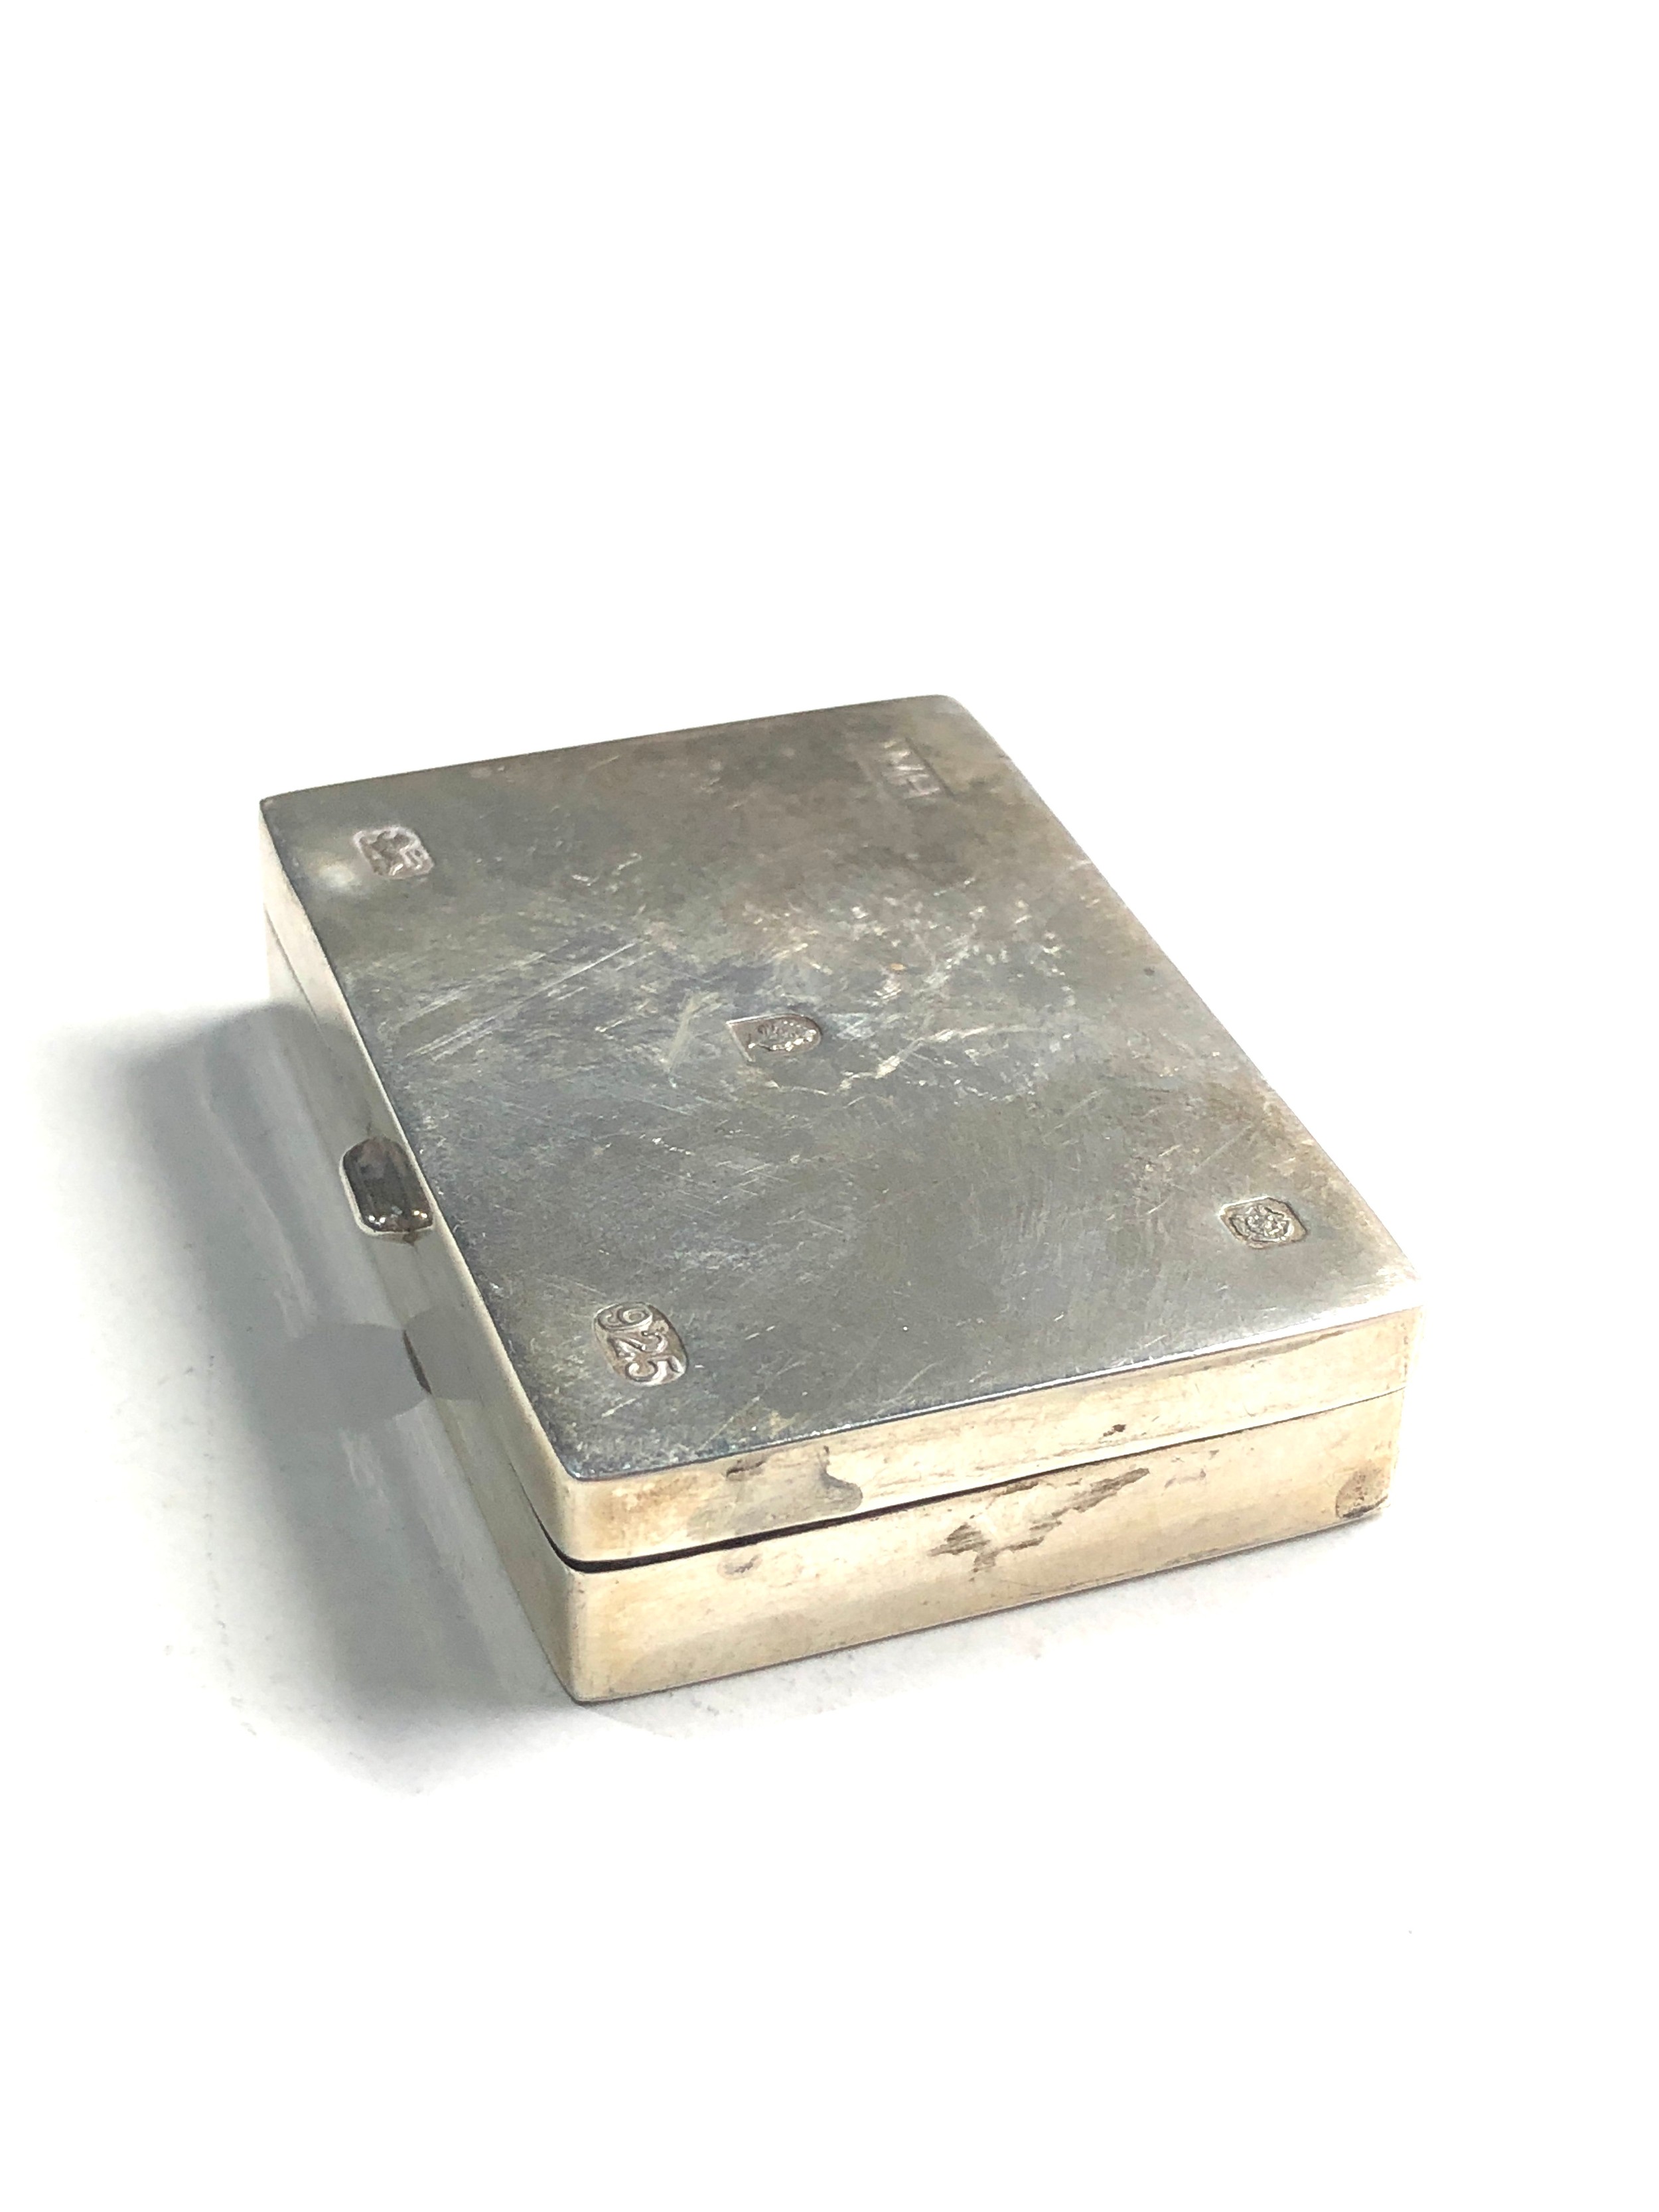 Vintage silver pill / snuff box - Image 2 of 3